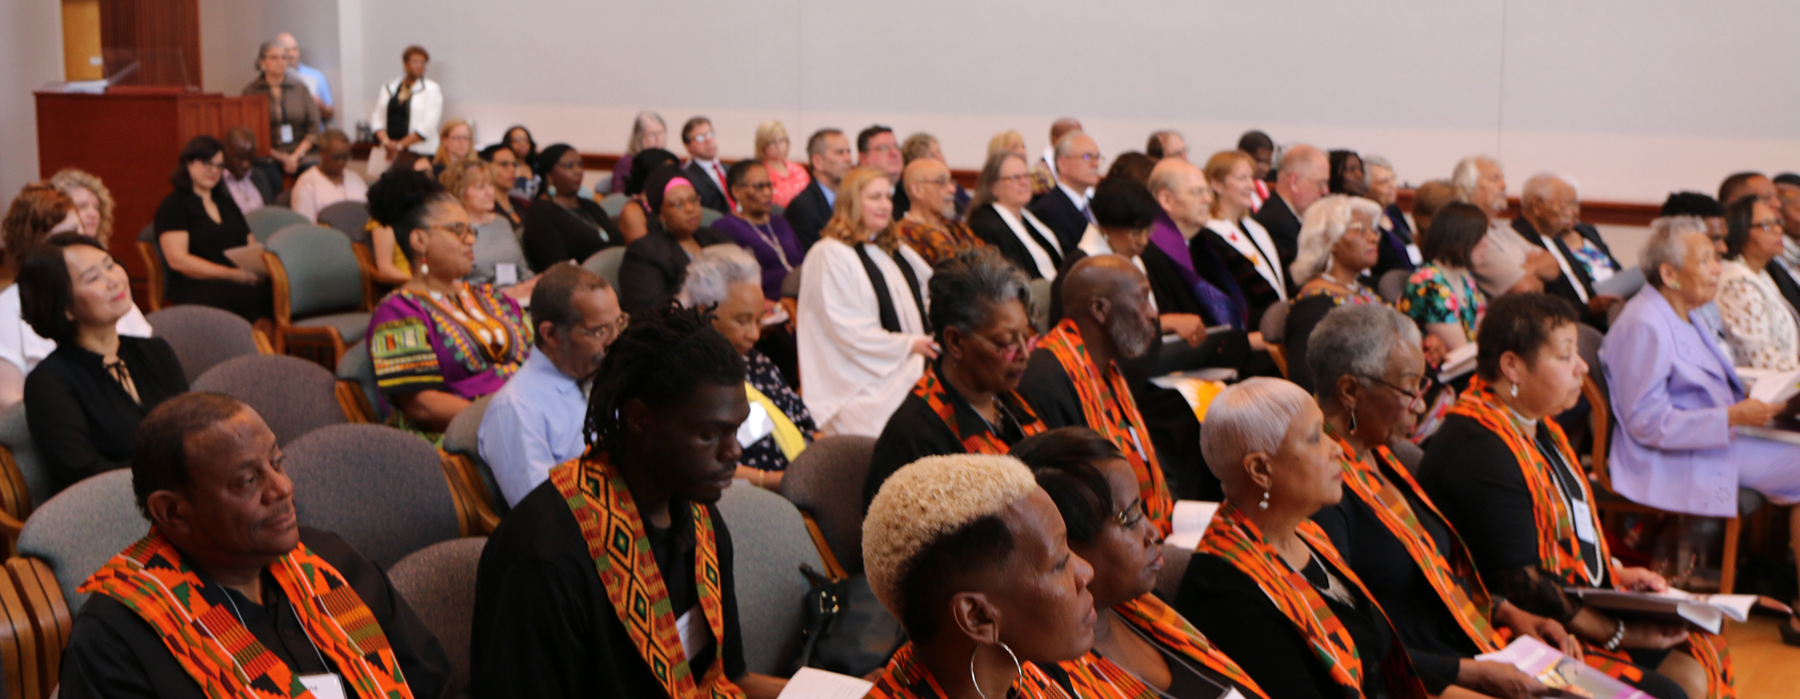 Image of guests attending memorial service celebrating the life of Rev. Robina Winbush. - Photo by Angie Stevens